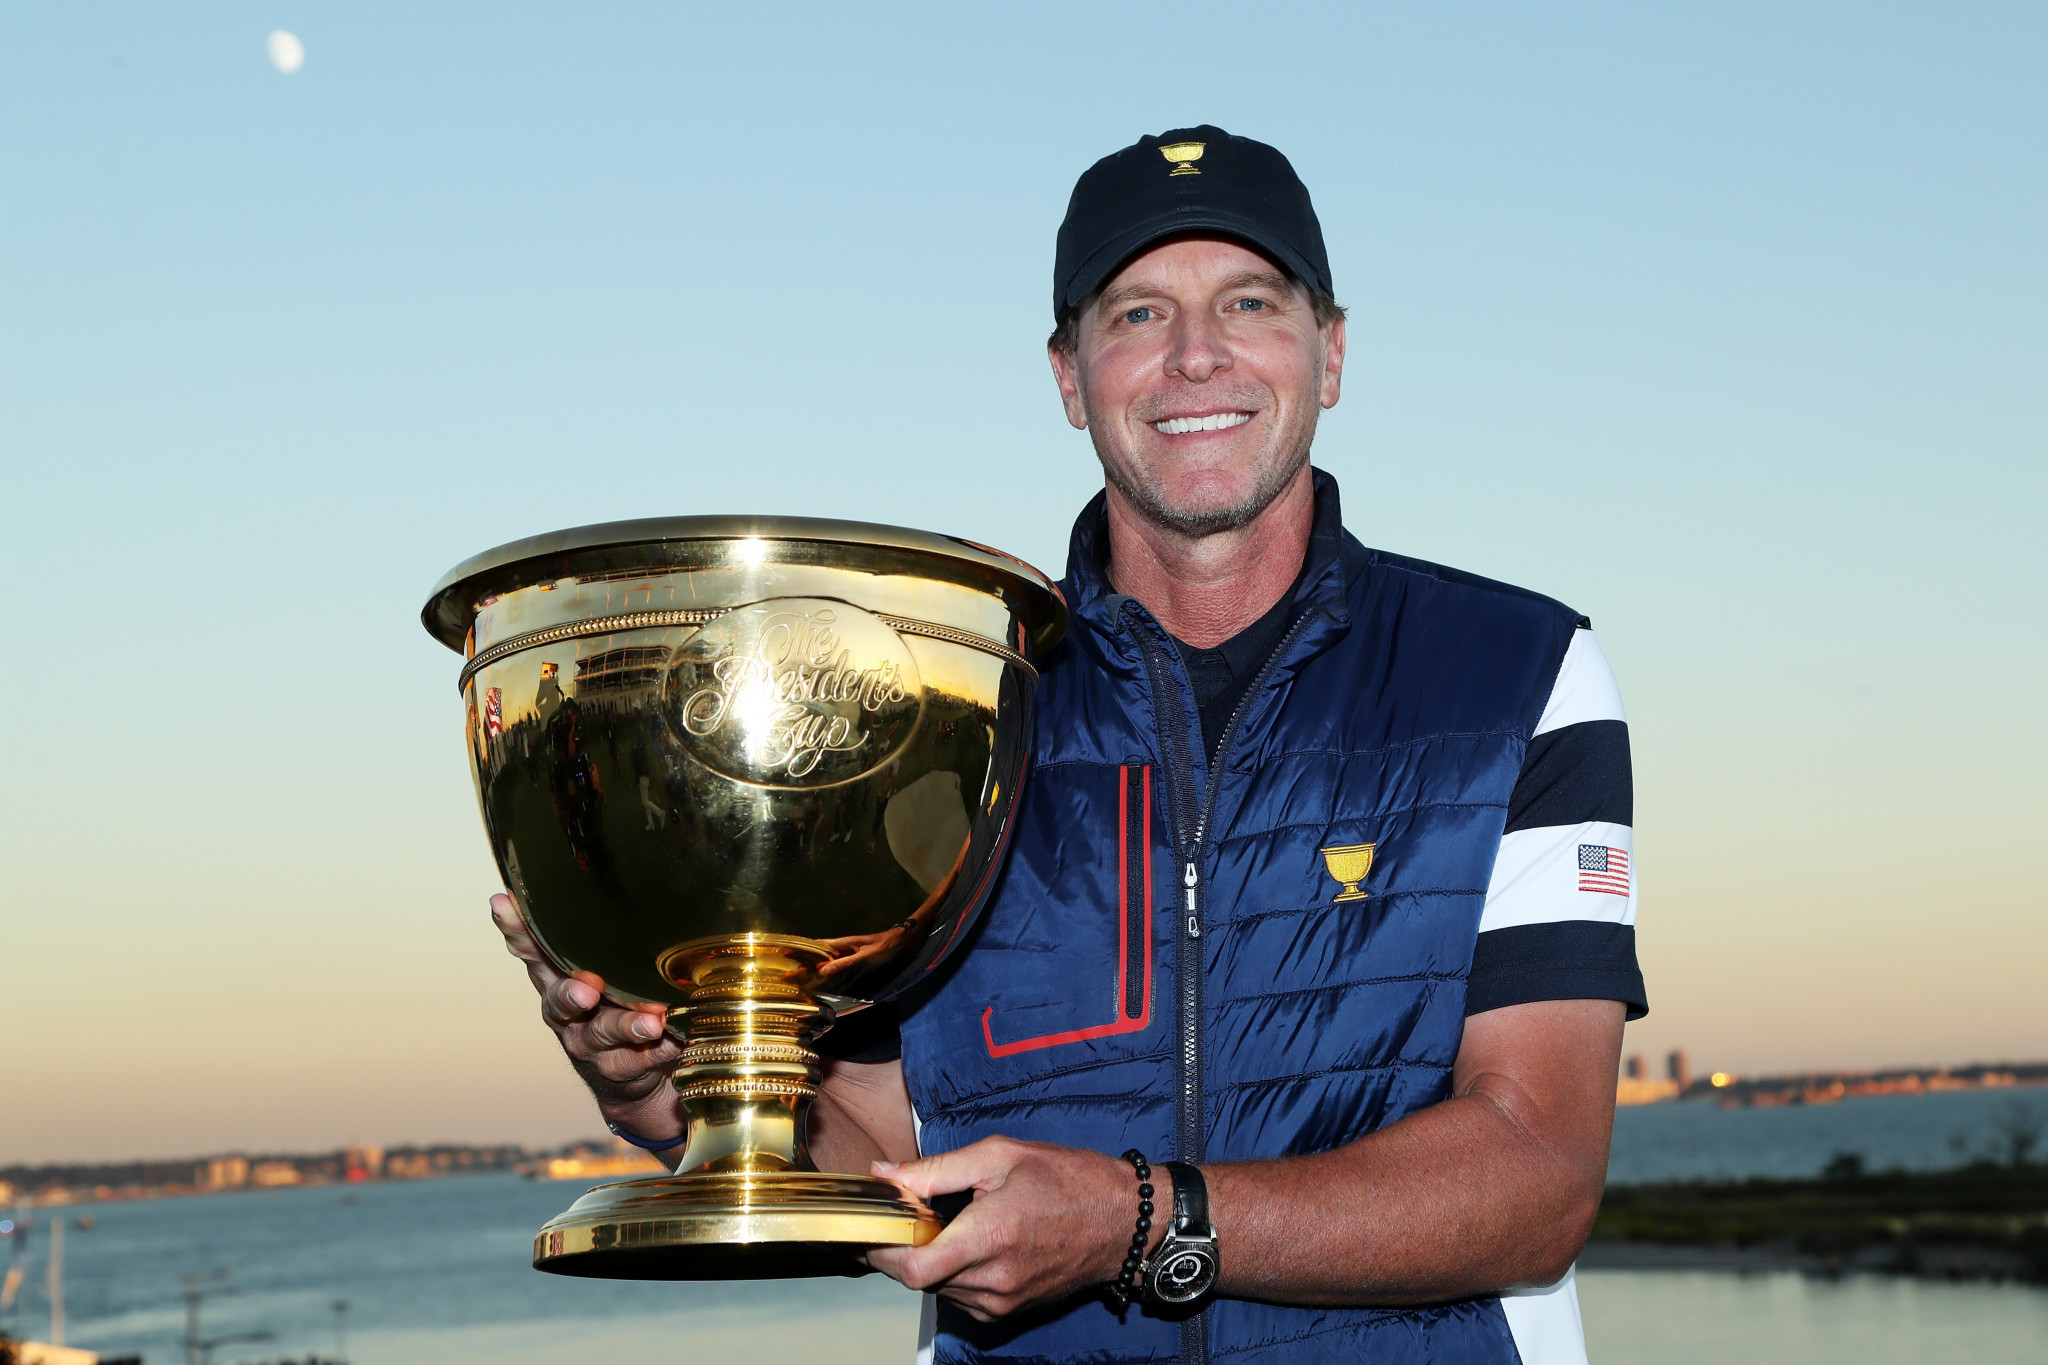 Steve Stricker captained the United States to victory at the last Presidents Cup in 2017 ©Getty Images